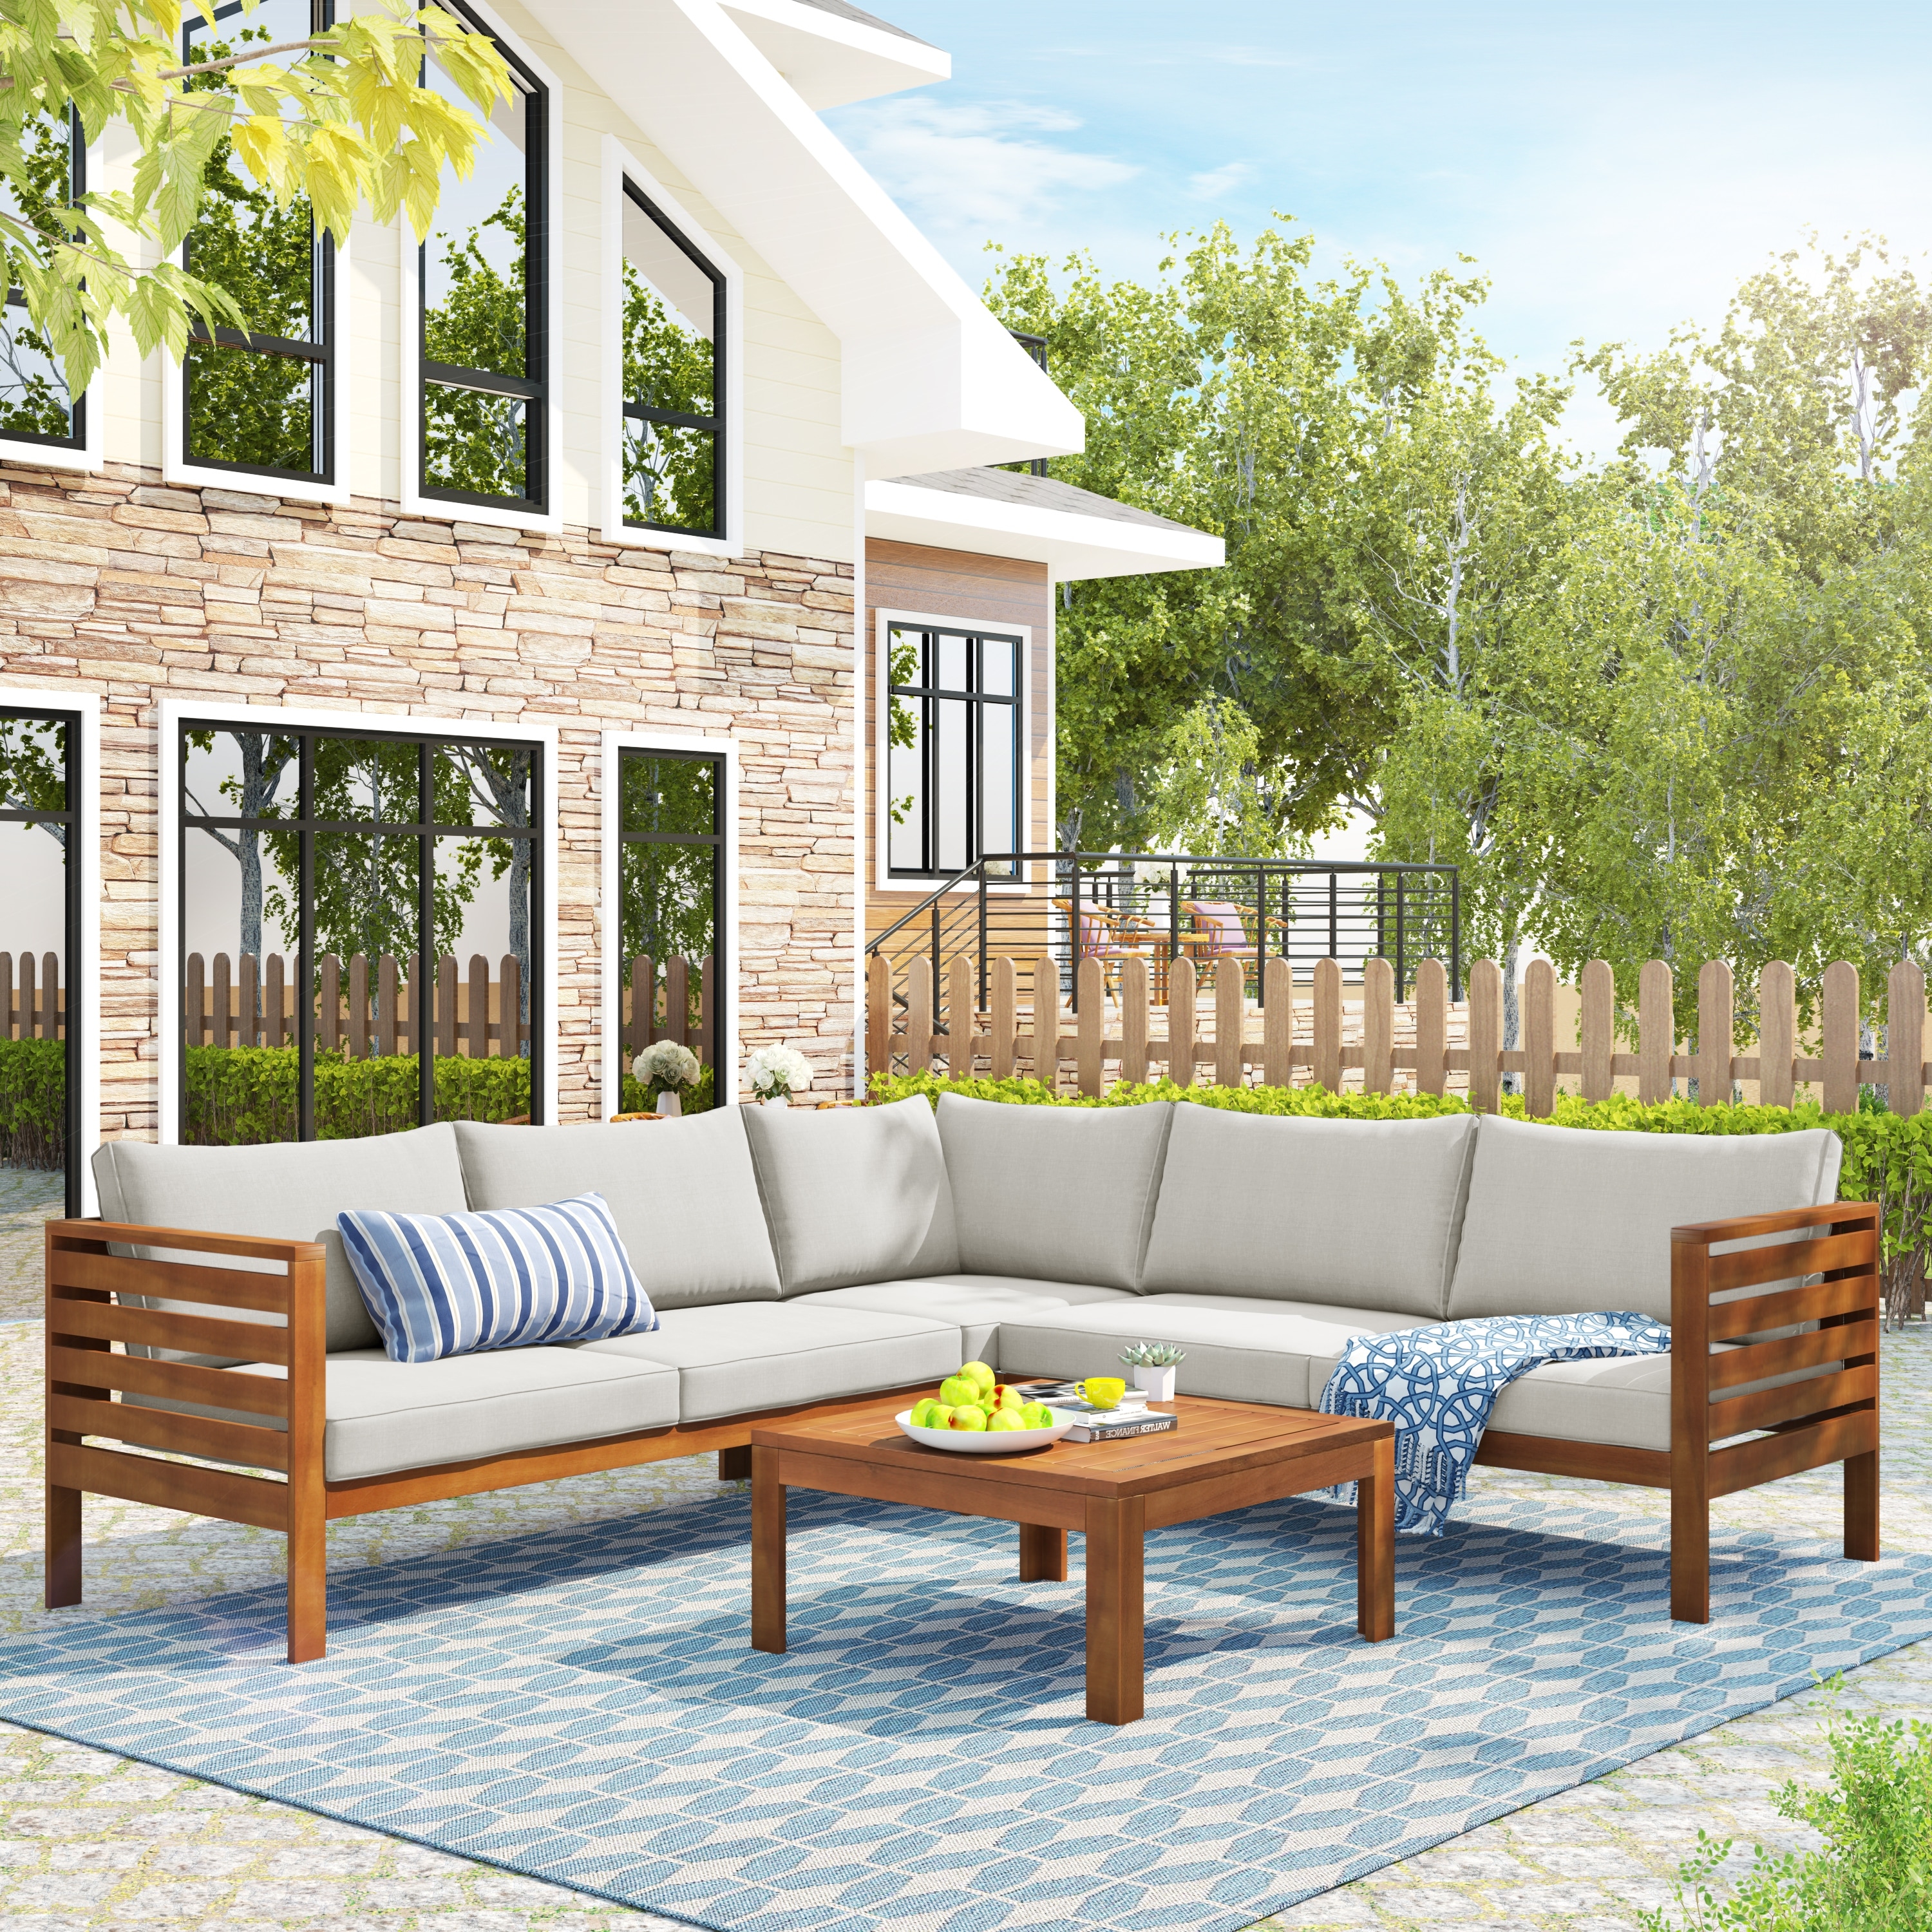 Beige Natural Log Wood Outdoor Sofa Set With Cushions embrace The Tranquil Beauty Of Japanese Zen Poetry In Your Outdoor Space